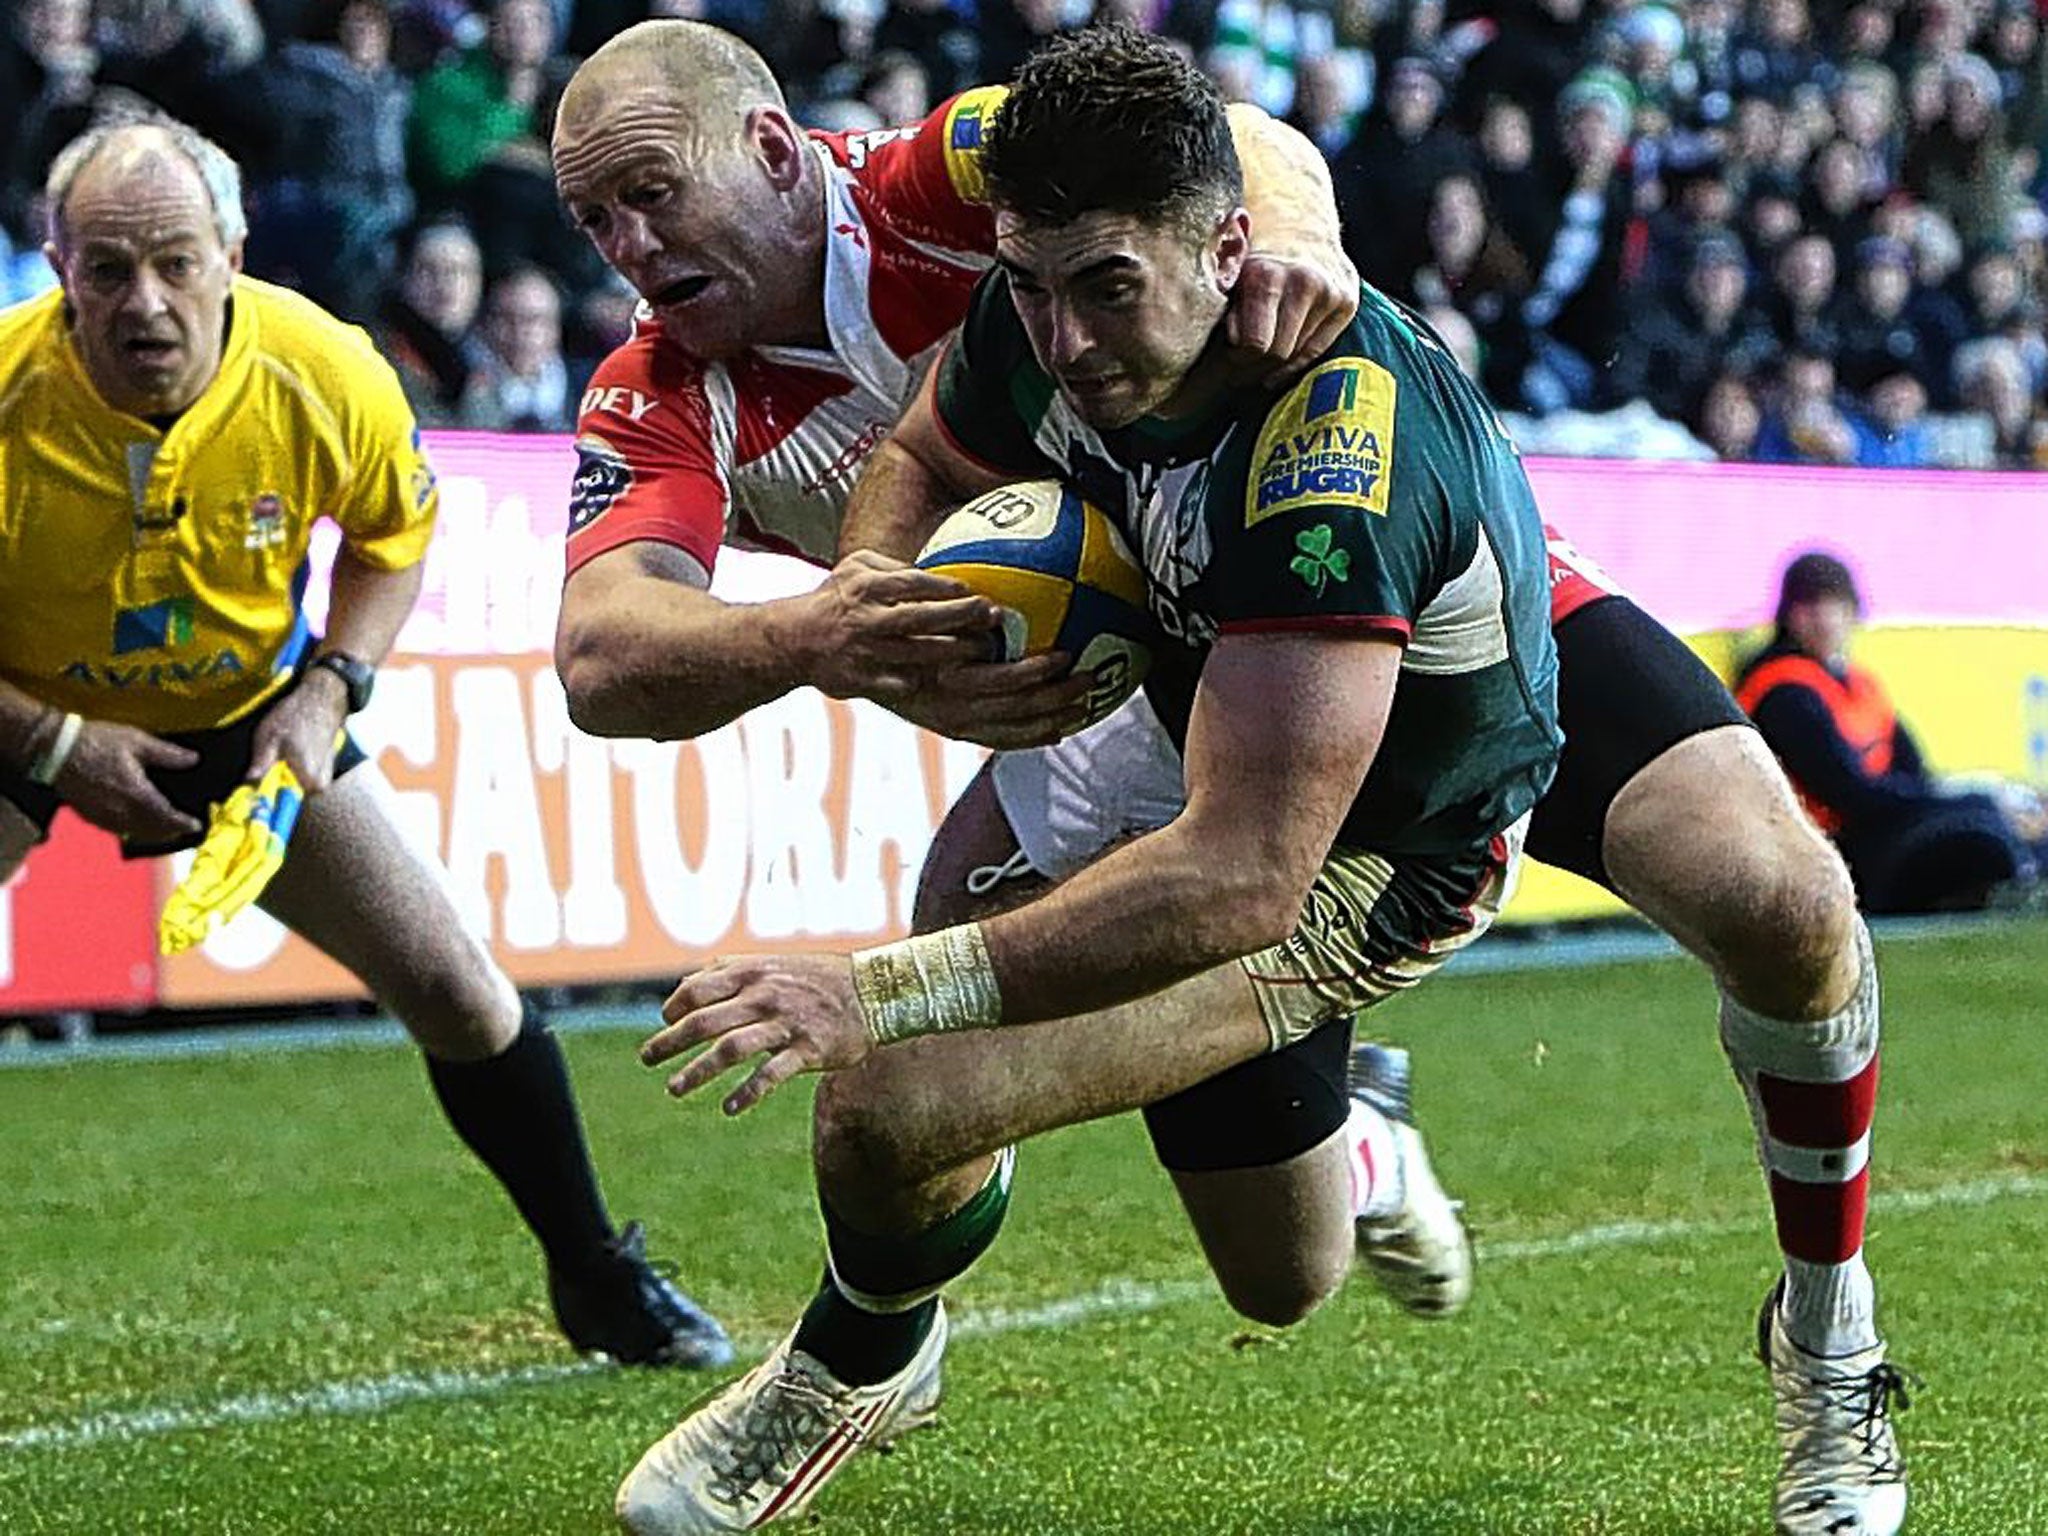 Eamonn Sheridan holds off Gloucester’s Mike Tindall to score his first try for London Irish on Sunday